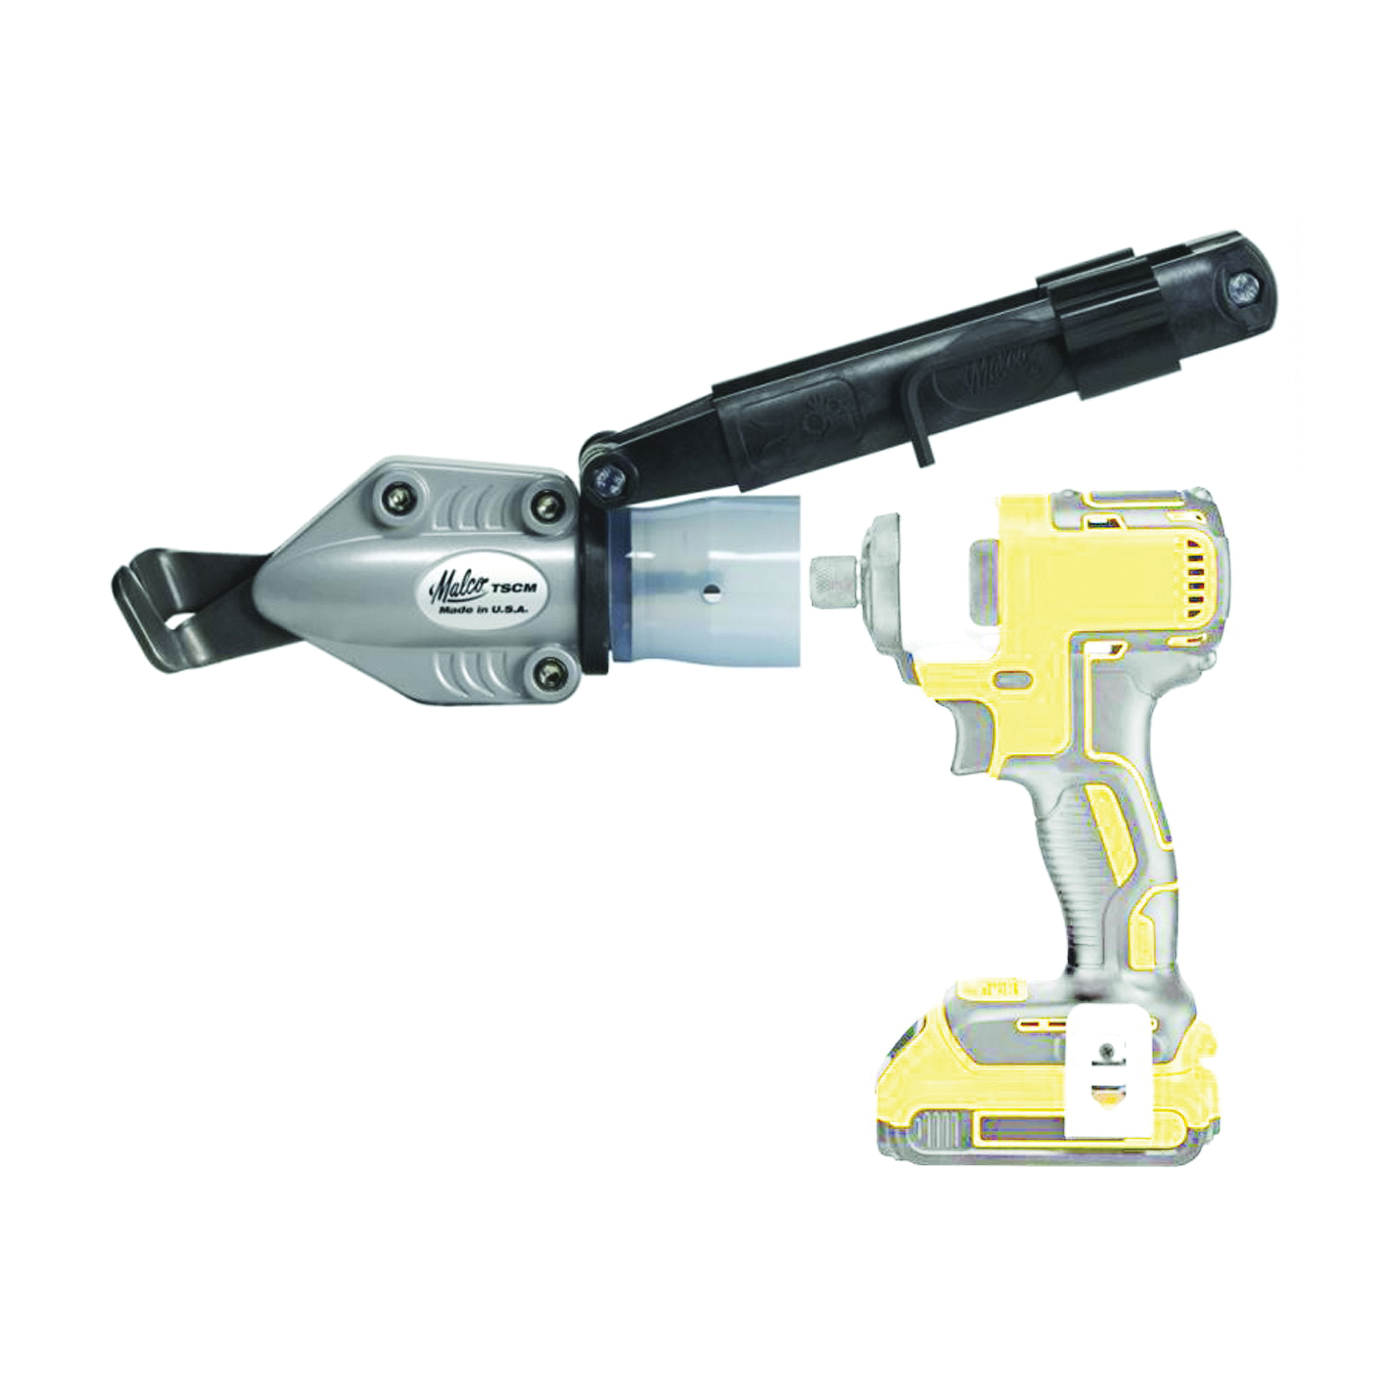 TSCM Turbo Shear, Tool Only, 0.012 to 0.024 in Cutting Capacity